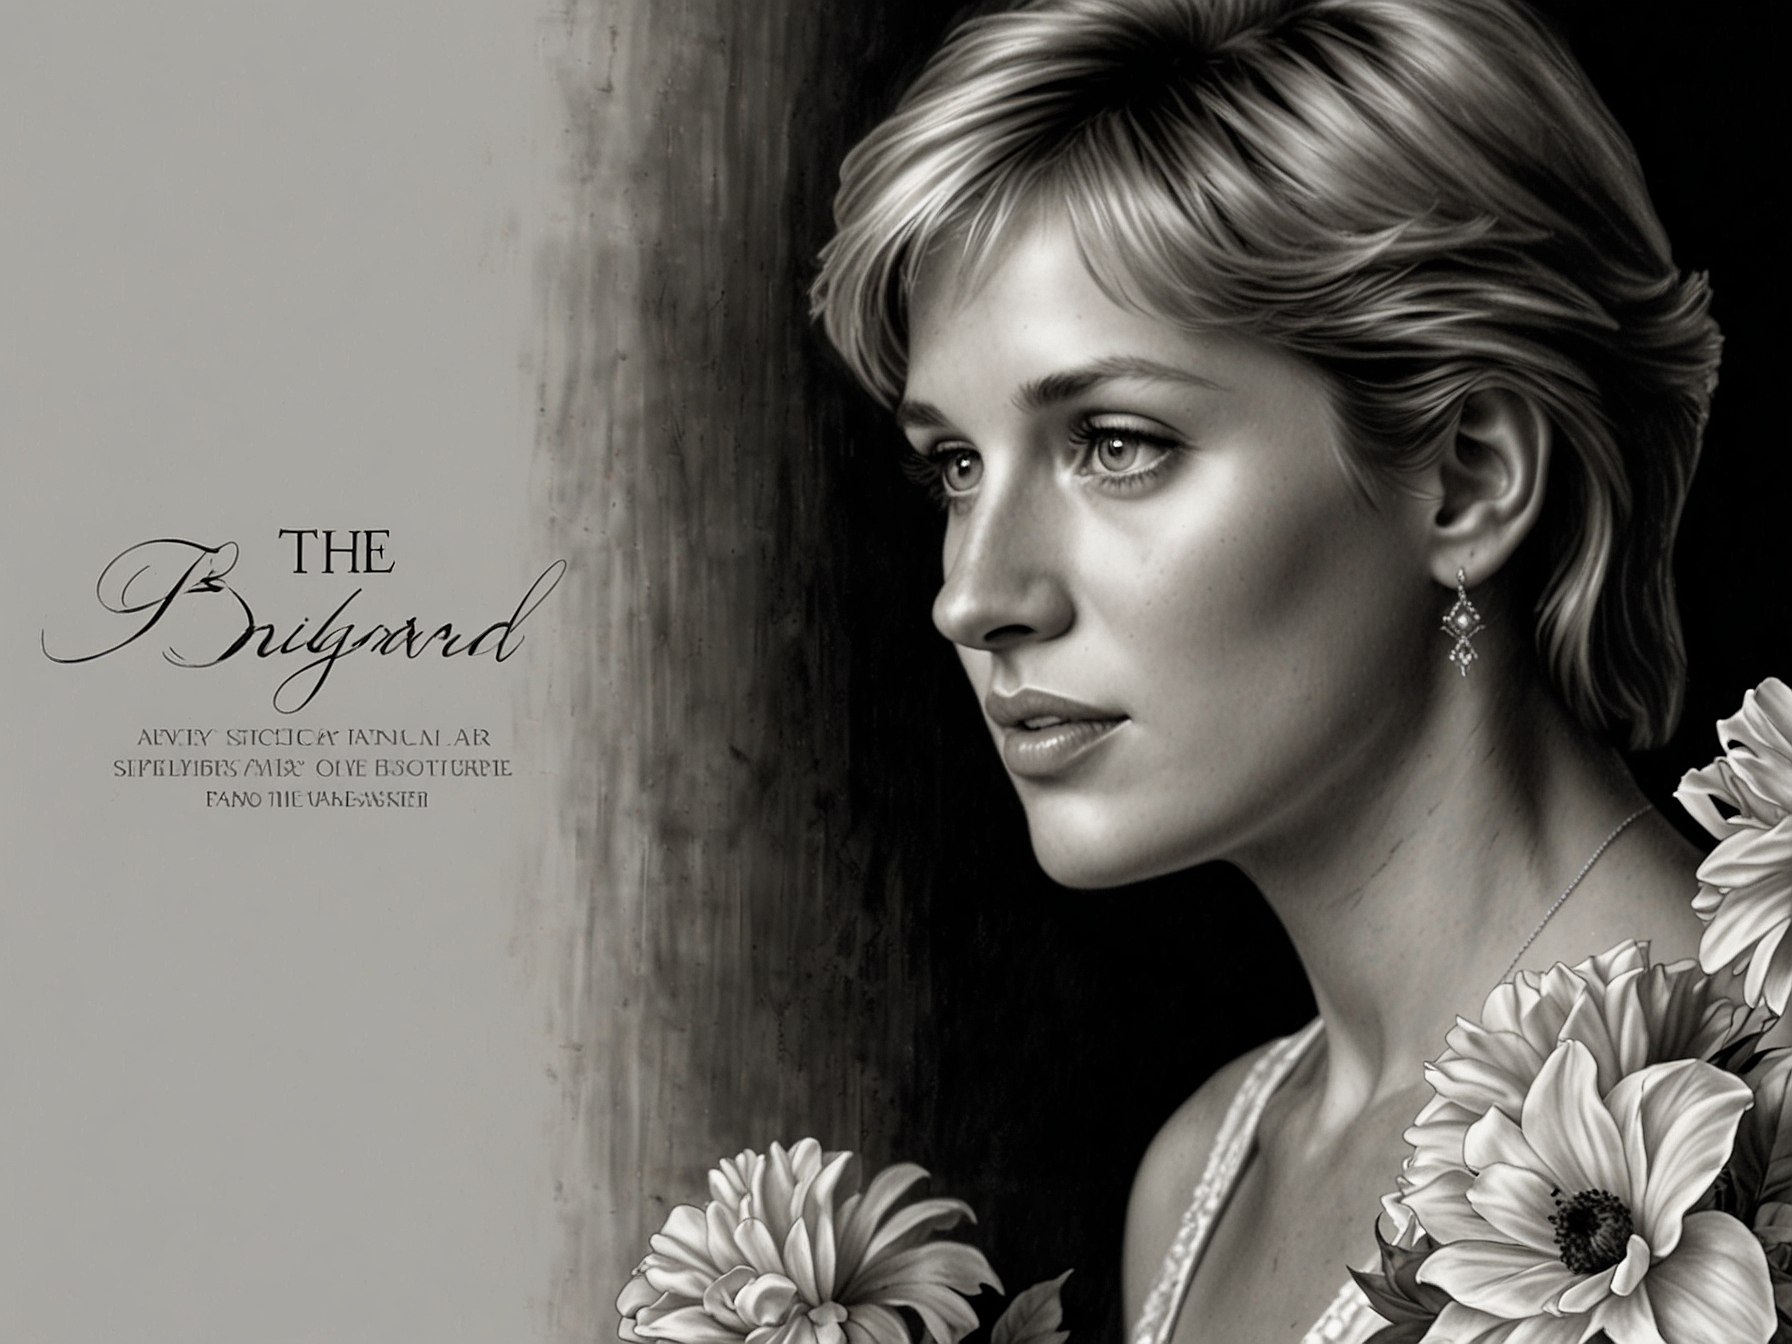 A film script with Princess Diana's name on the cover, placed beside a bouquet of flowers, representing the unmade 'The Bodyguard' sequel and her unfulfilled cinematic dream.